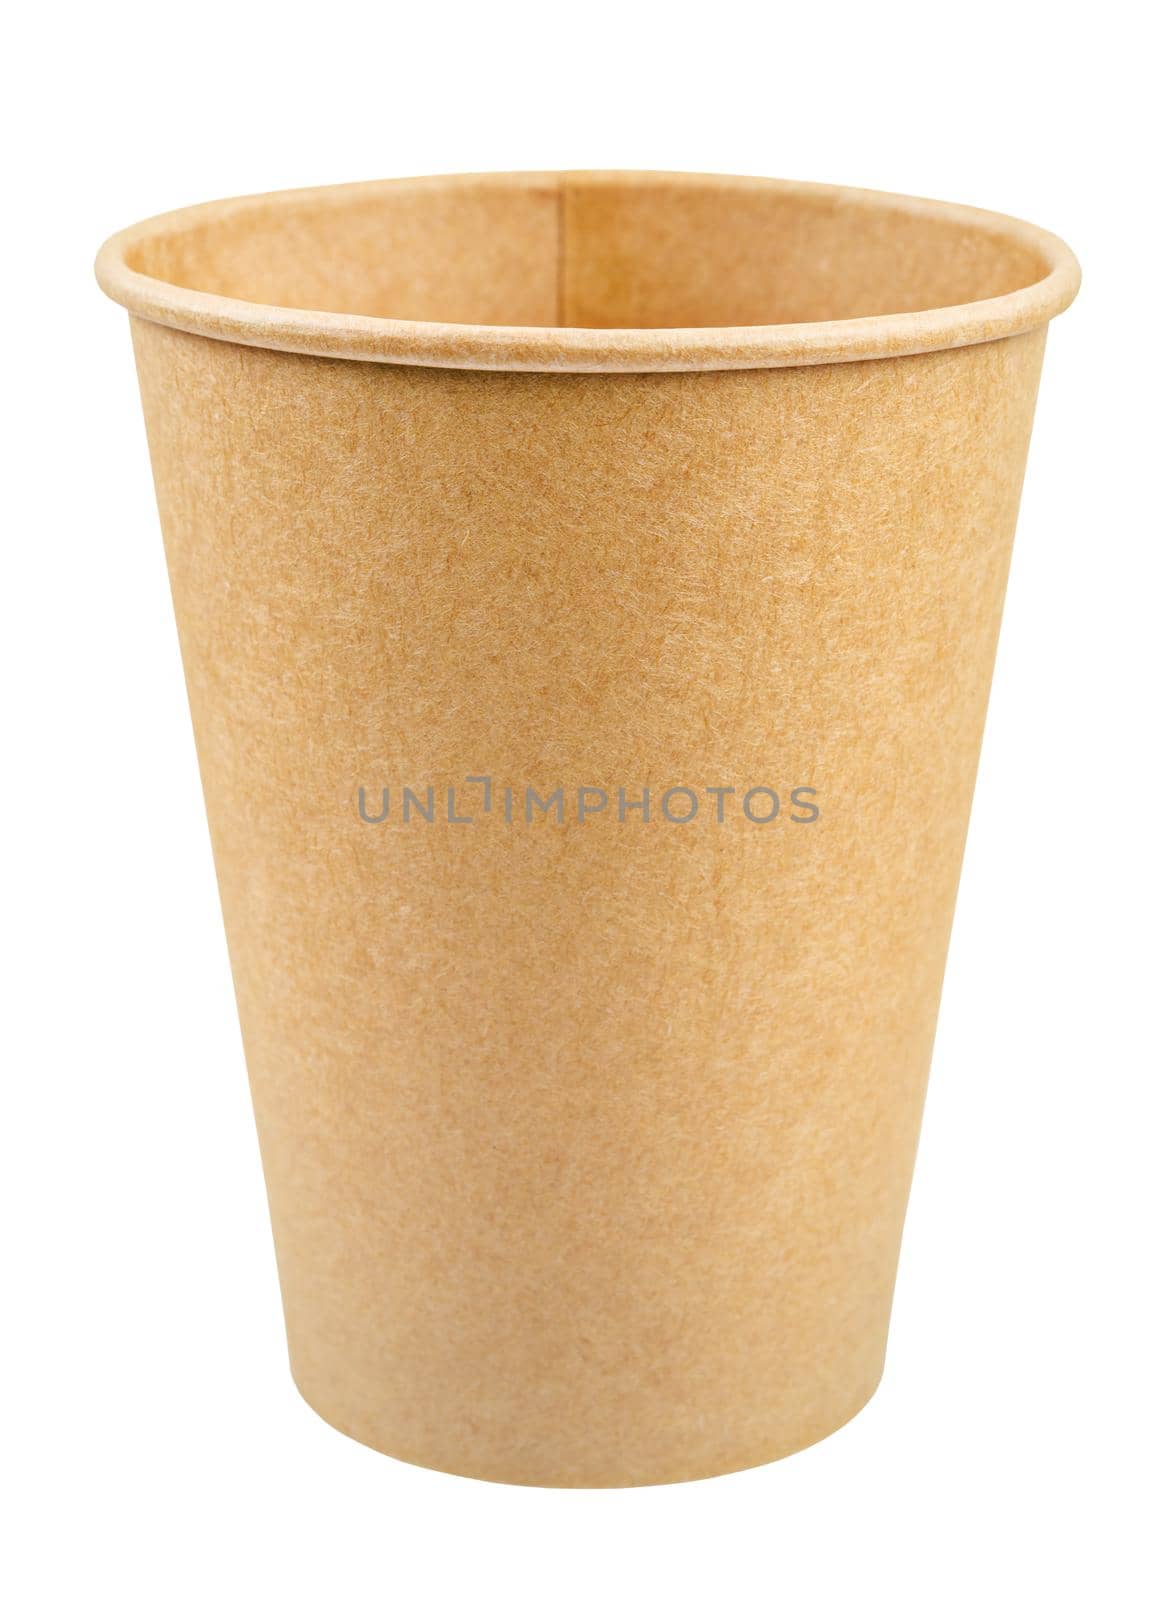 Disposable Brown paper cup for coffee, tea, a drink from environmental materials. by Gamjai